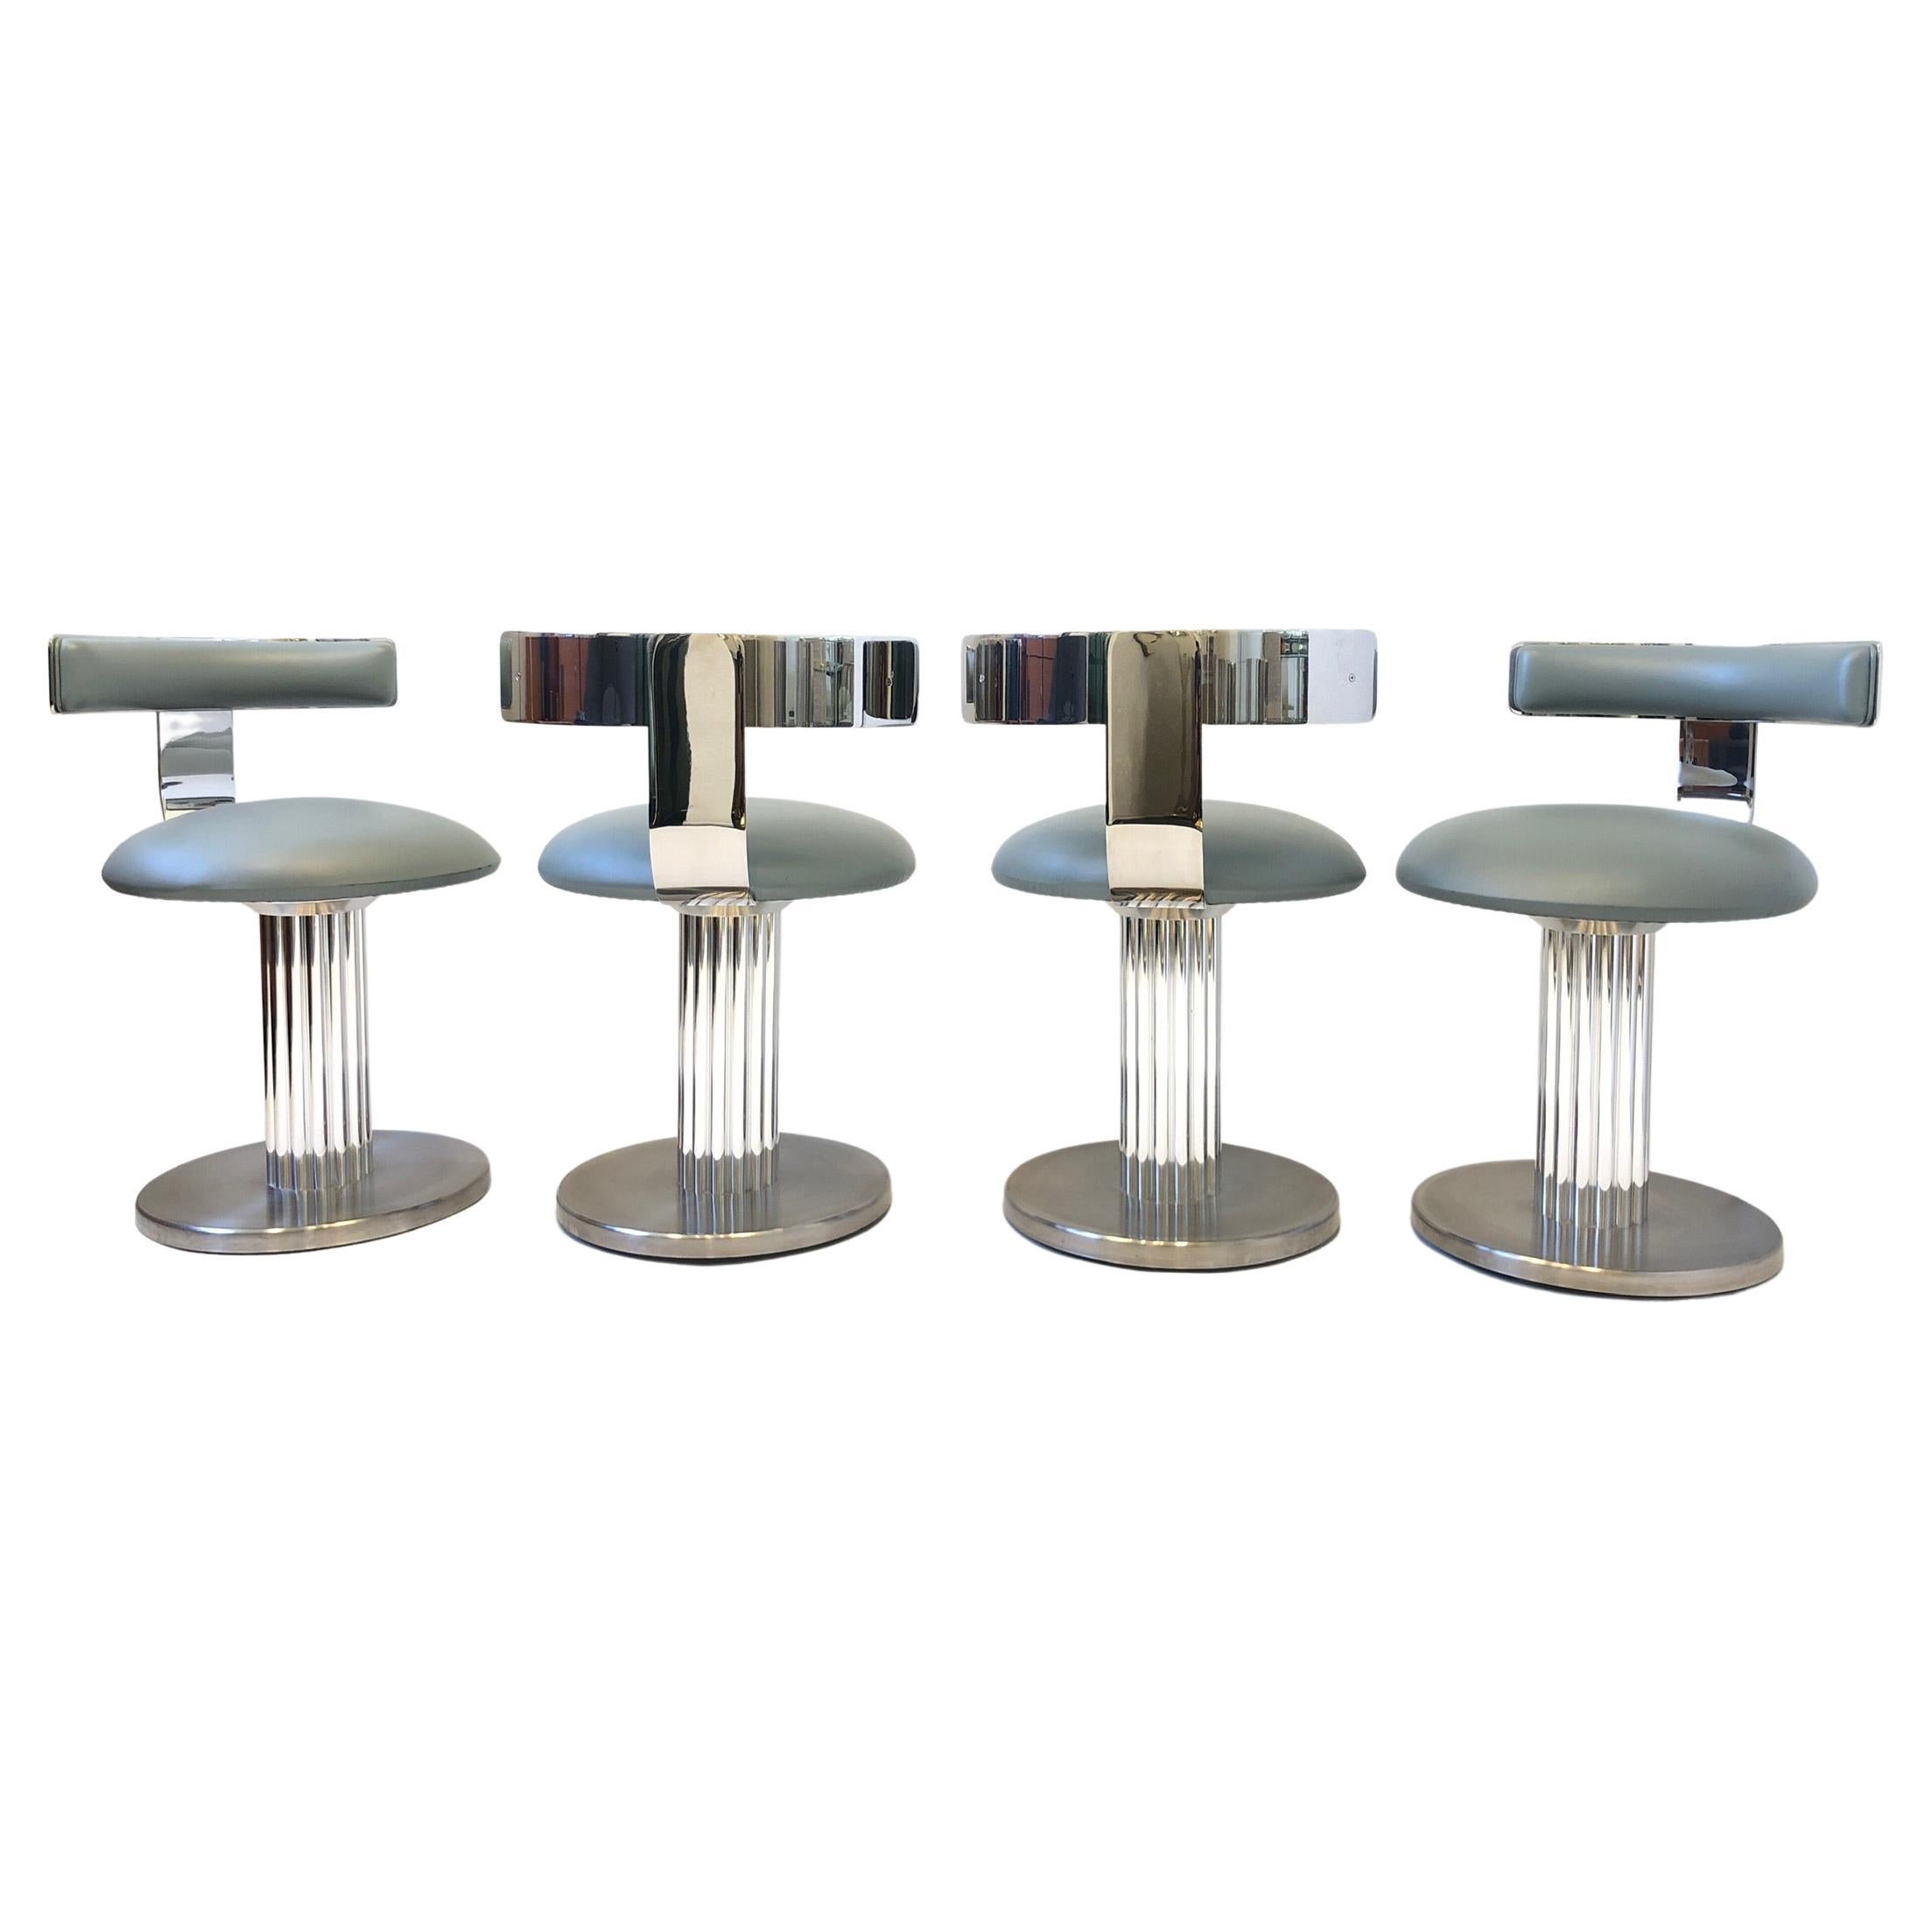 Set of Four Stainless Steel Swivel Stools or Chairs by Design For Leisure